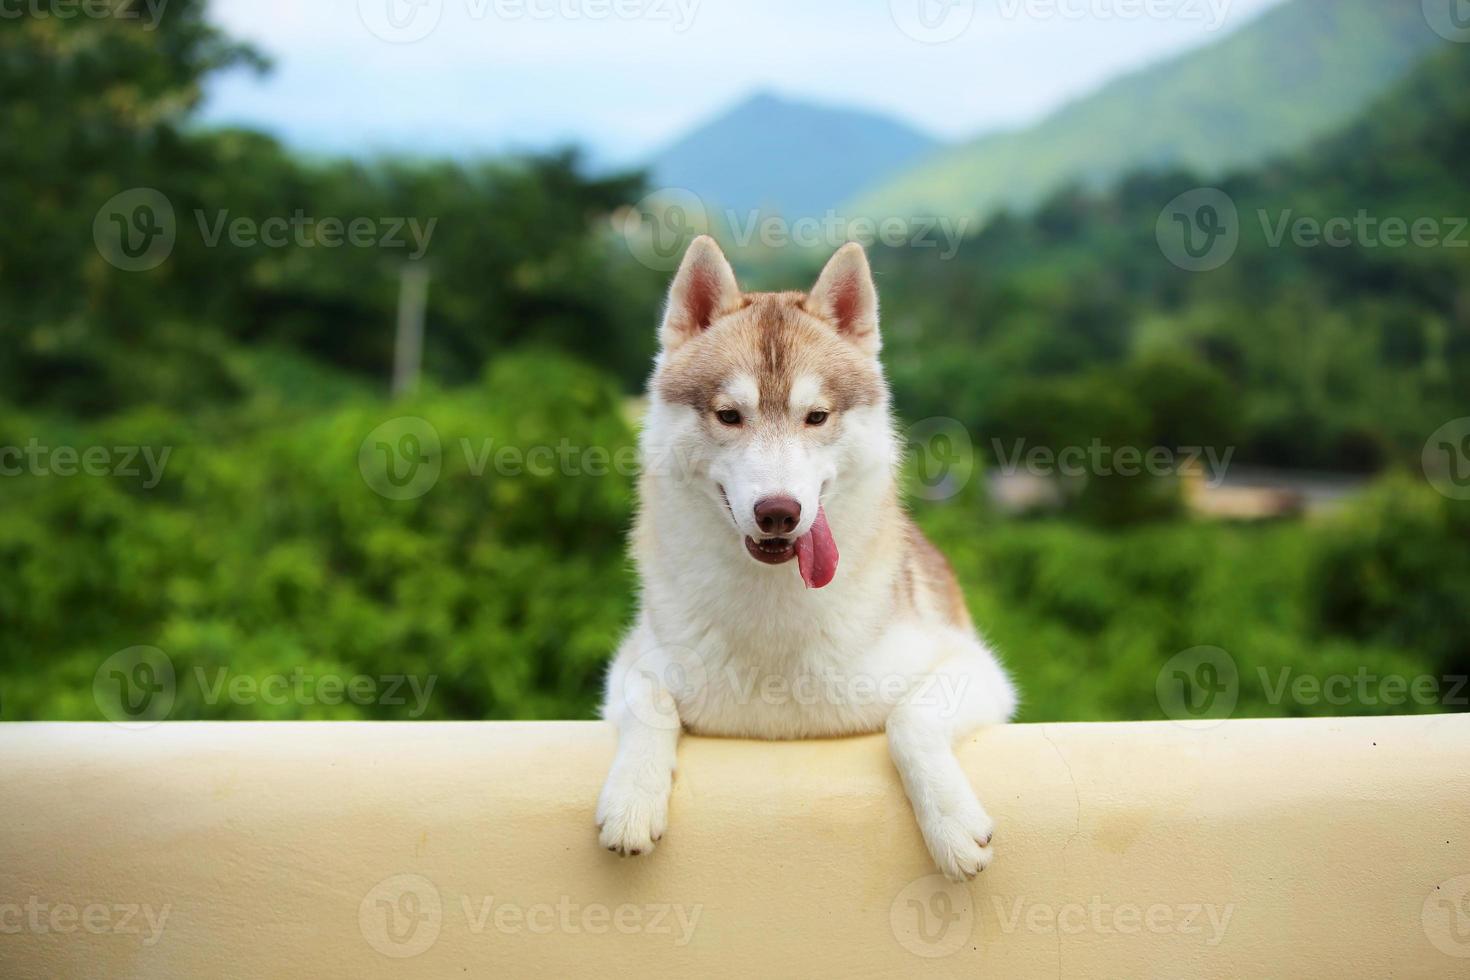 Siberian Husky in grass field with mountain background, happy dog, dog smiling, dog portrait photo